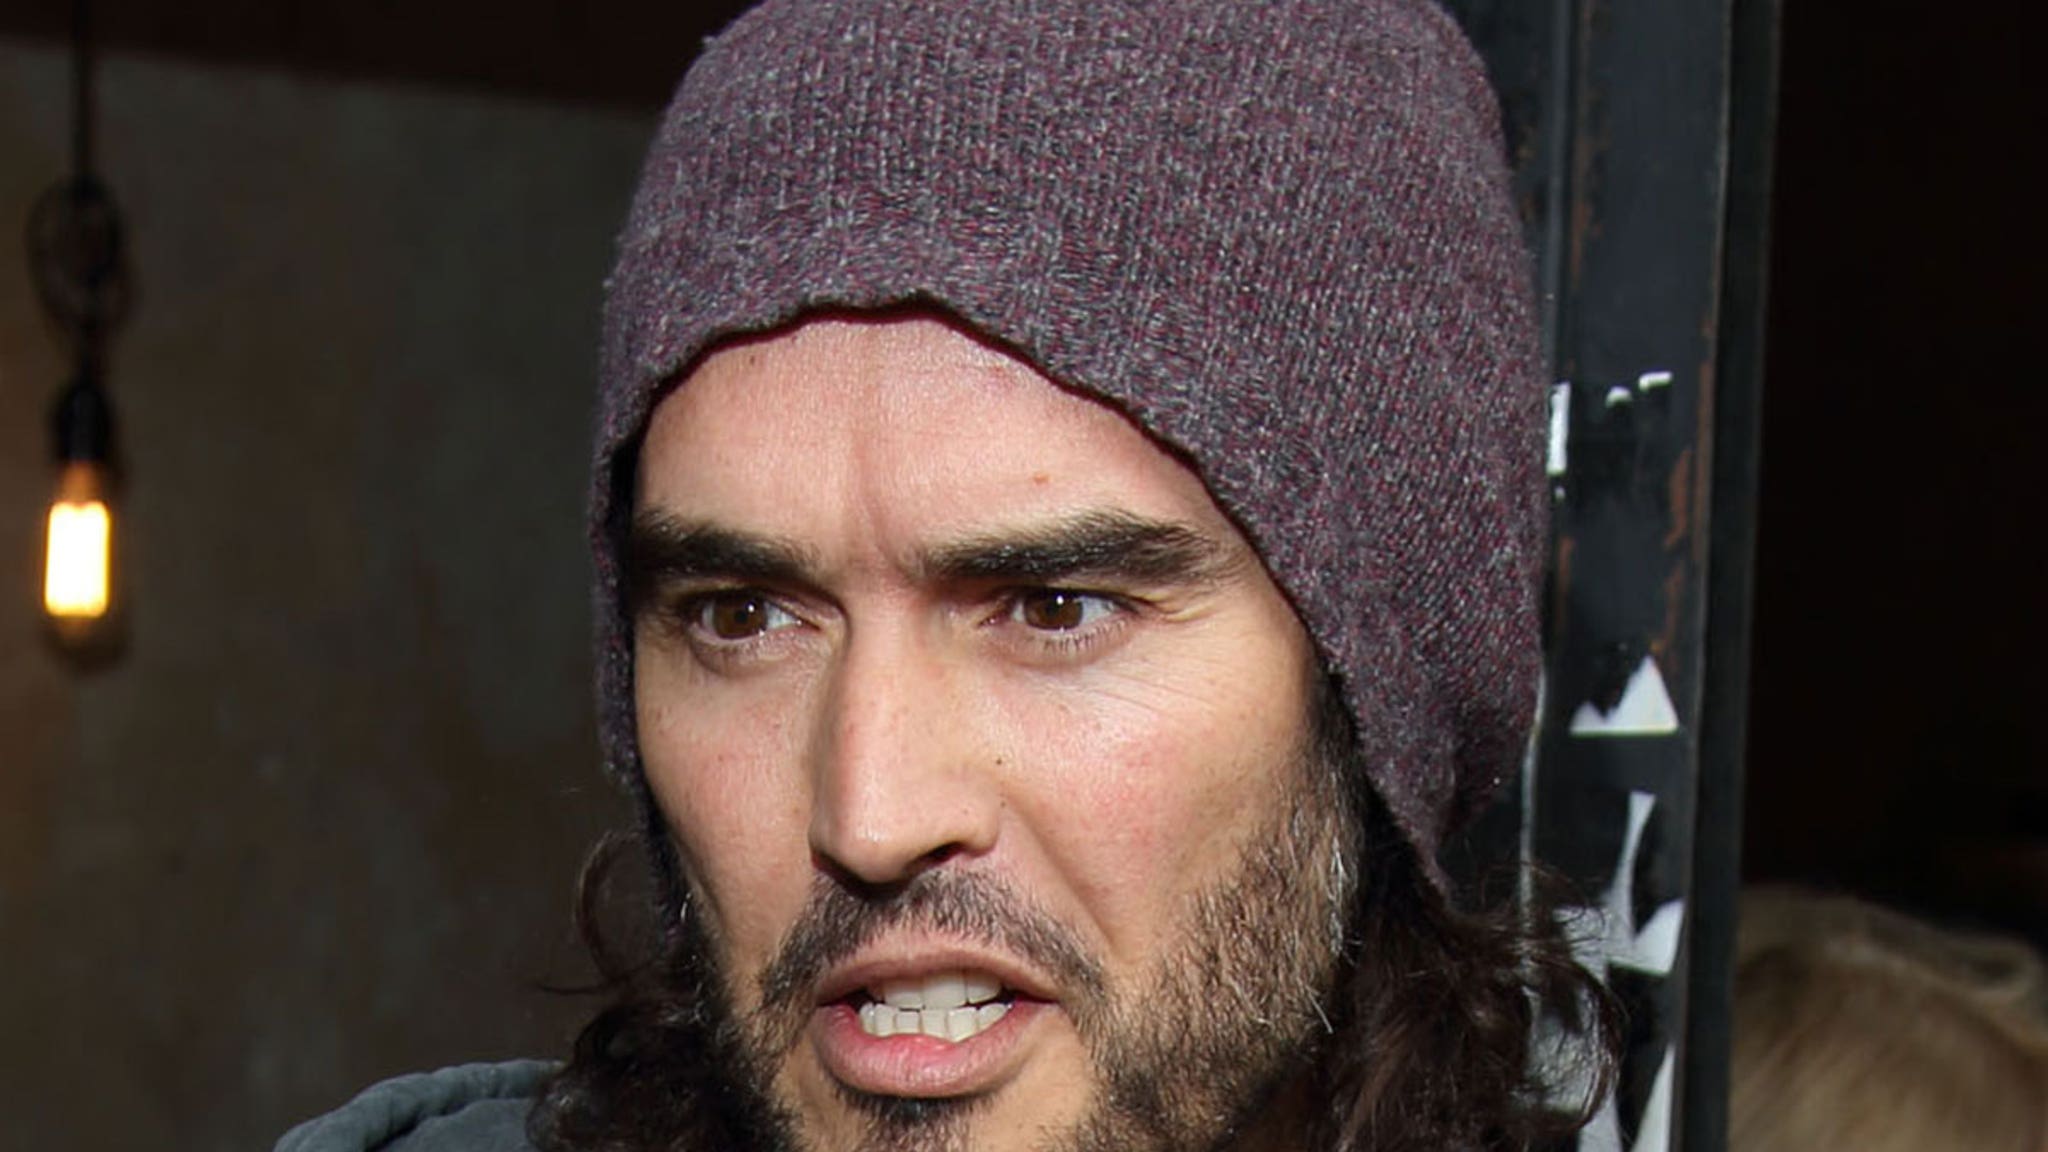 ‘Russell Brand Faces Lawsuit Over Alleged ‘Arthur’ Set Sexual Assault’